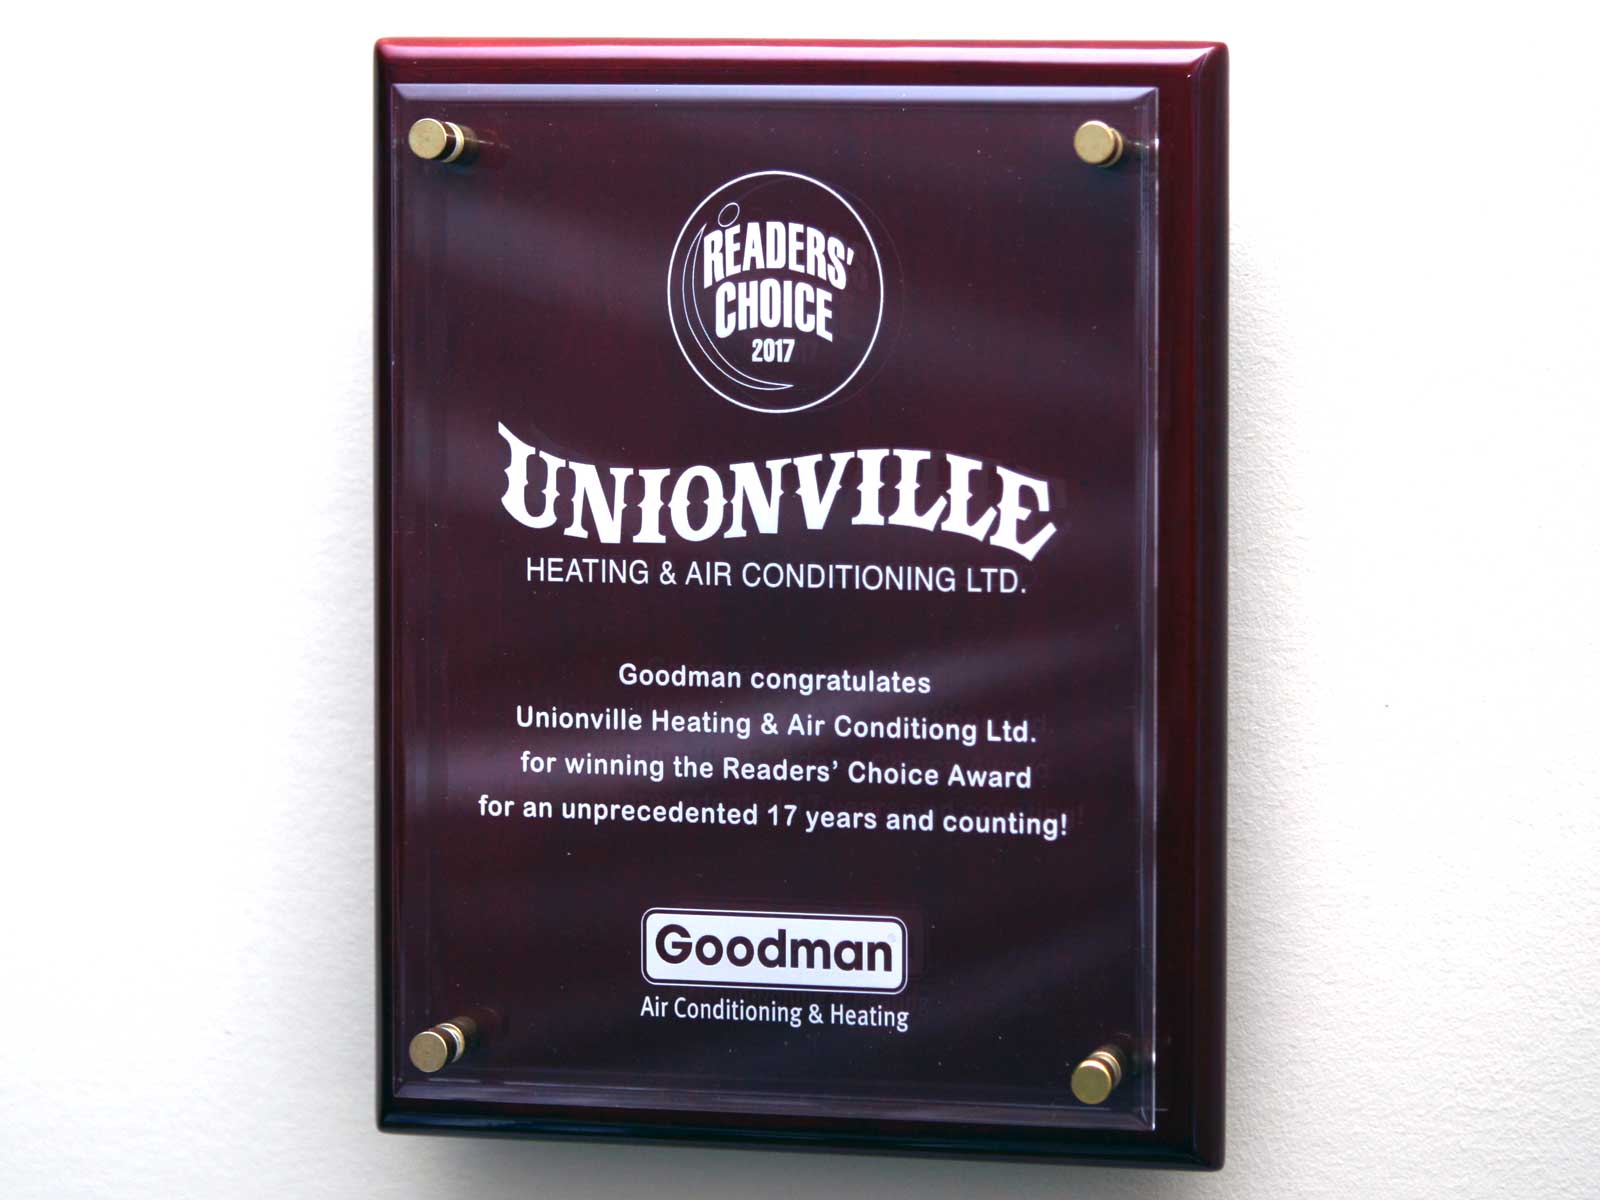 Goodman congratulates Unionville Heating and Air Conditioning